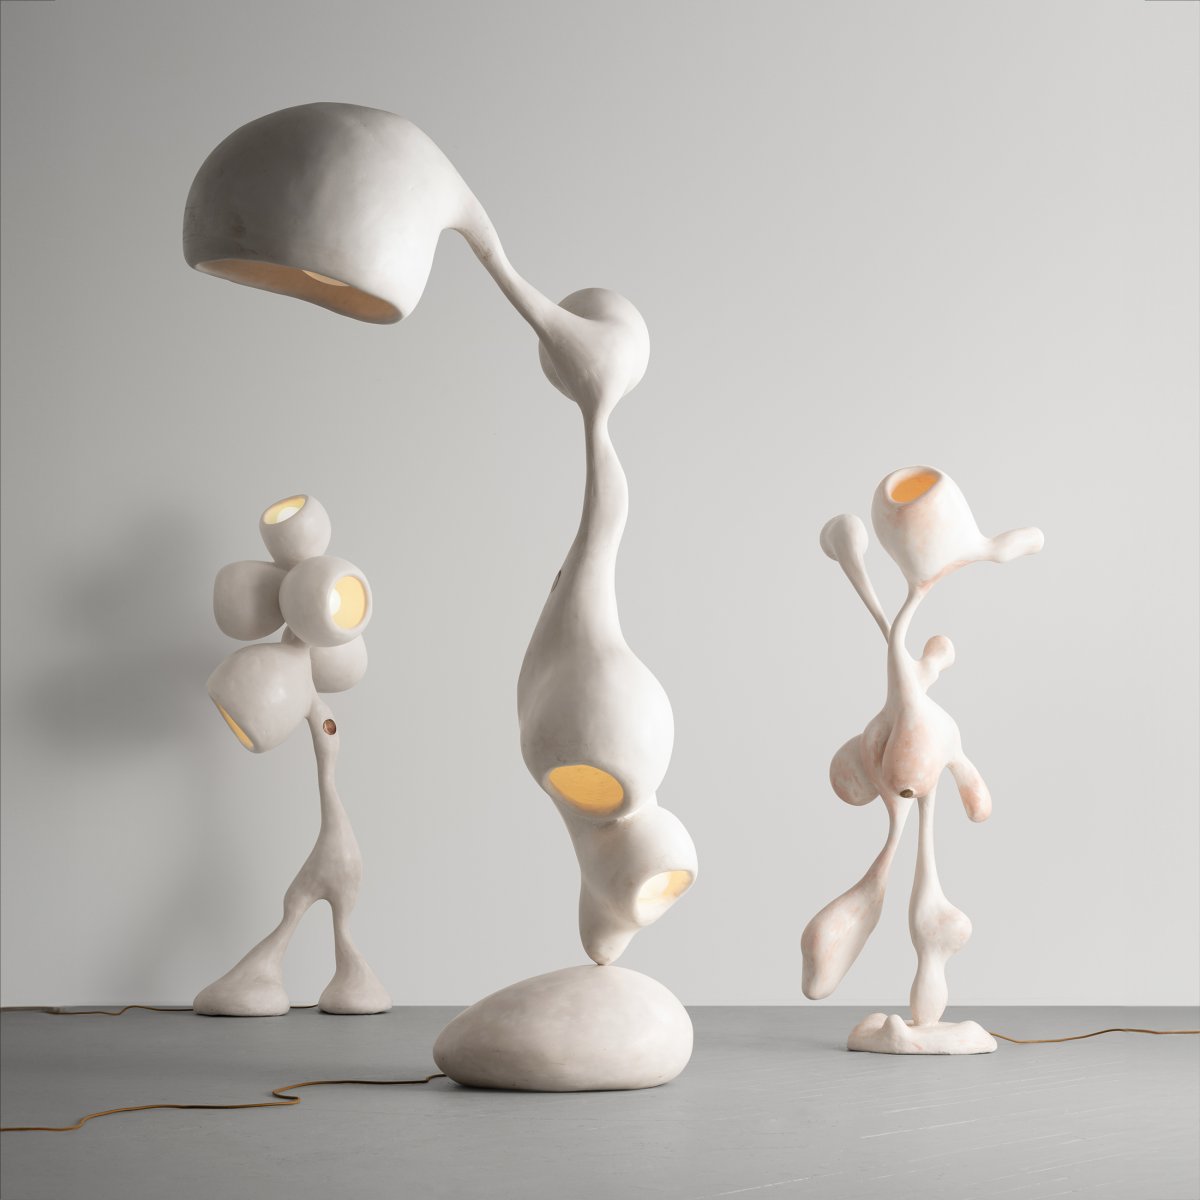 Rogan Gregory’s gypsum lamps including (left to right) Loe Depositor, 2022, 66 x 31 in.; Ovorepository, 2022, 91 x 24 in.; and Tiny Dancer (Ballerina), 2022, 68 x 18 x 22 in. Photo by Joe Kramm, courtesy of R & Company.